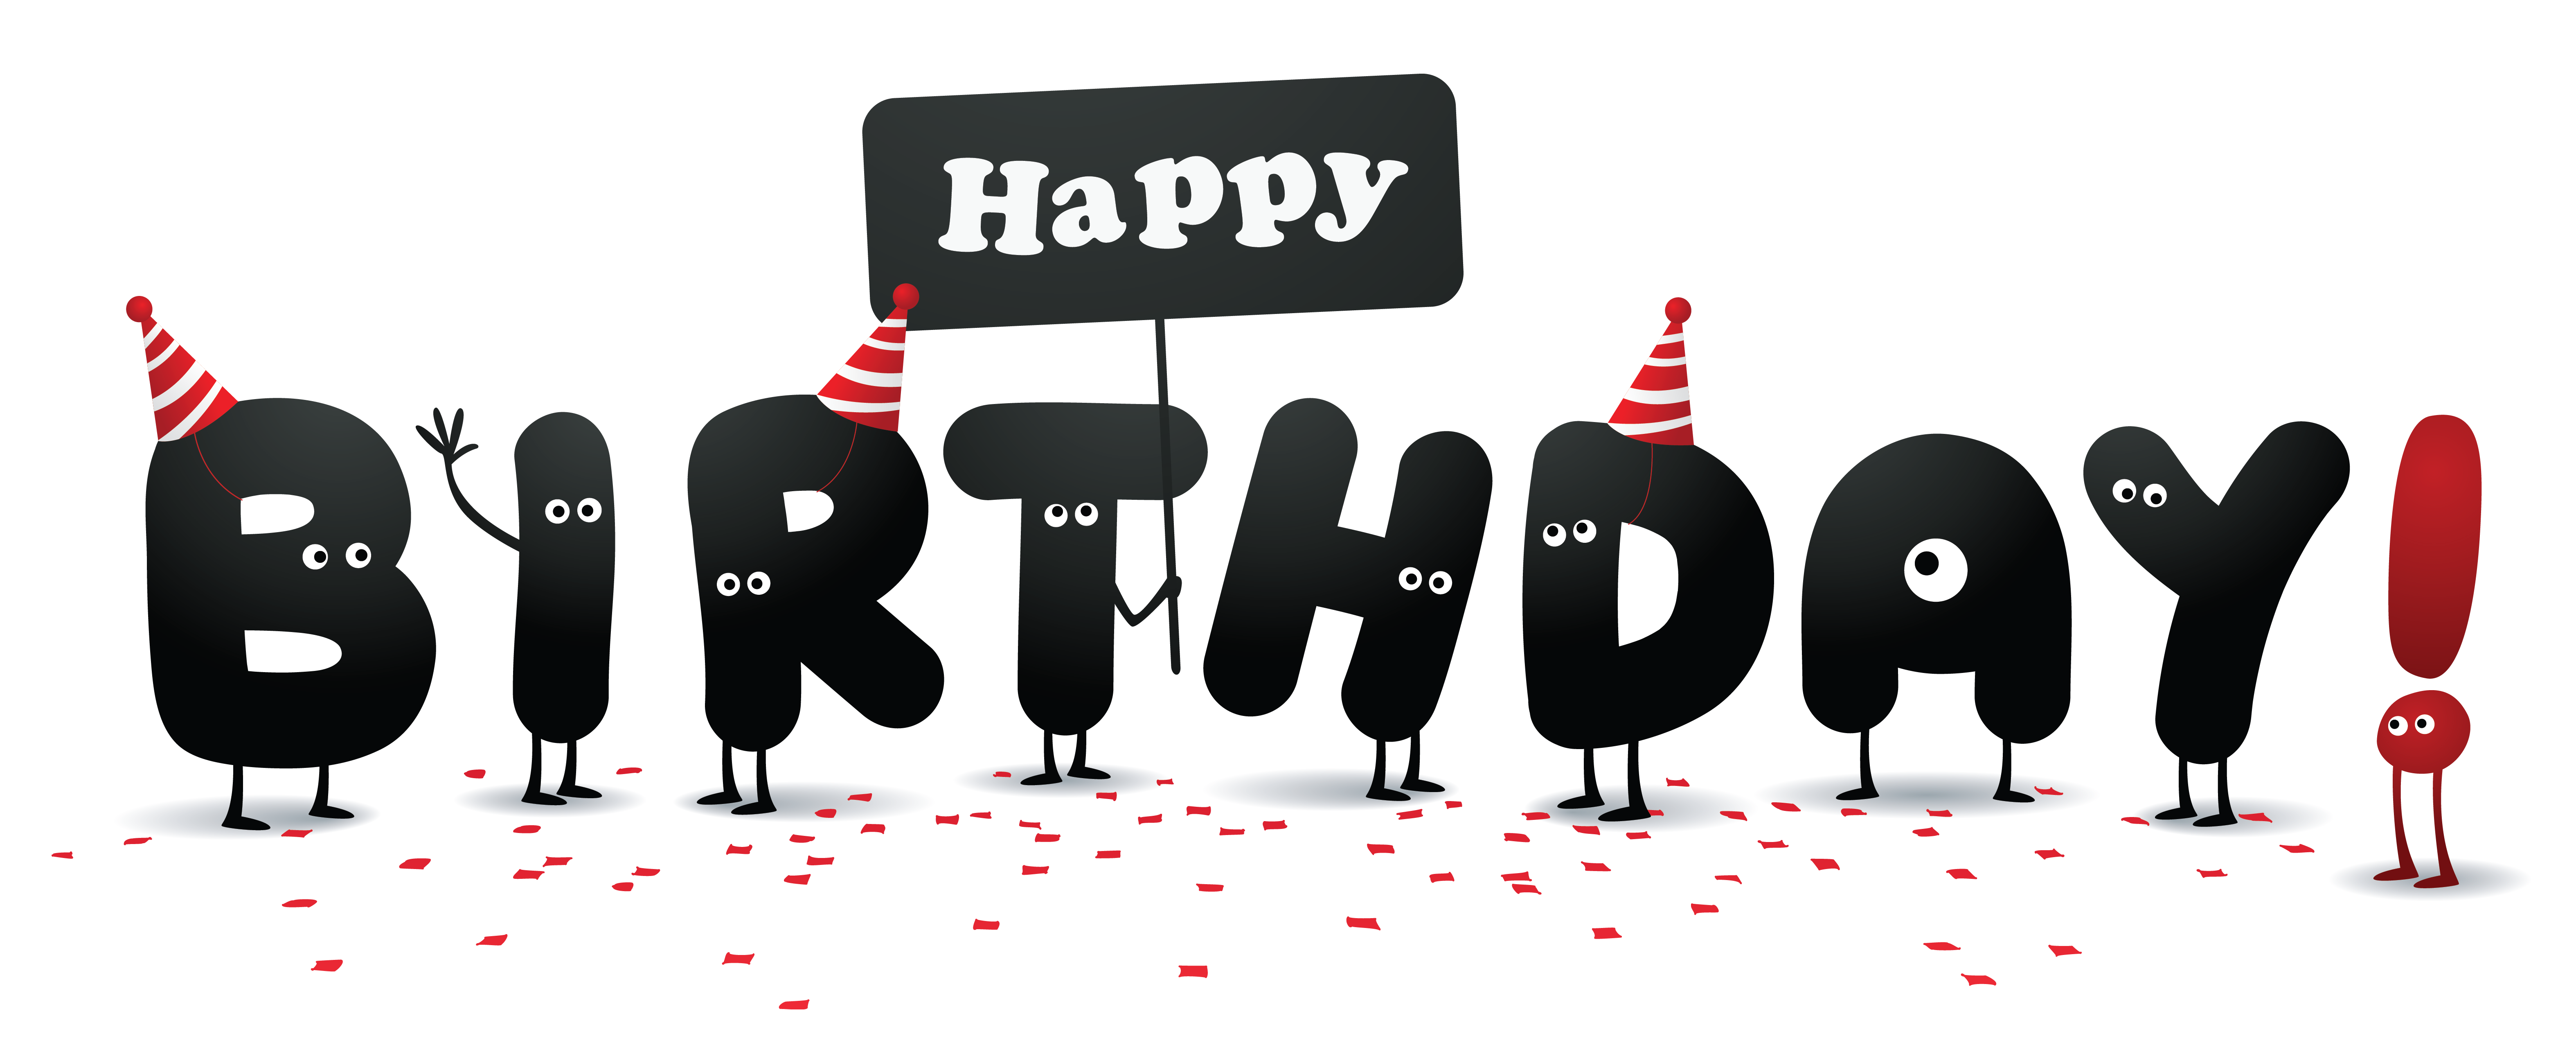 Funny Happy Birthday Clipart Picture?m=1438293943